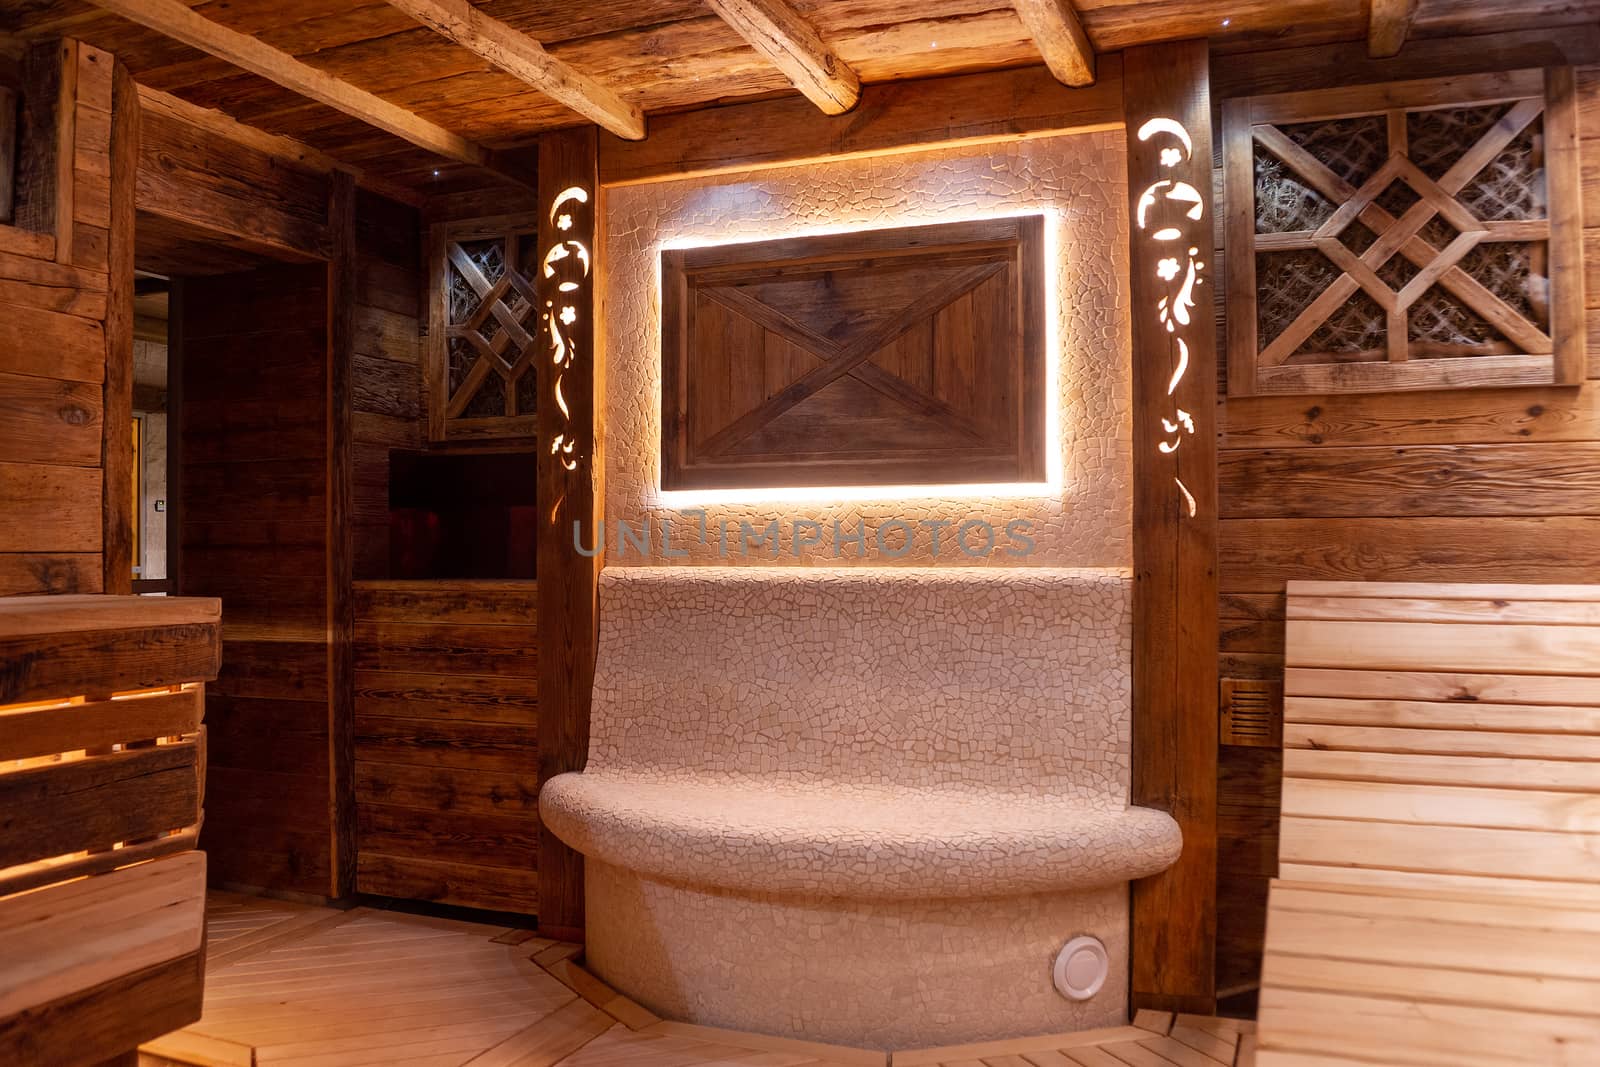 Handmade bath in the spa complex. The bath is trimmed with plank by alexsdriver